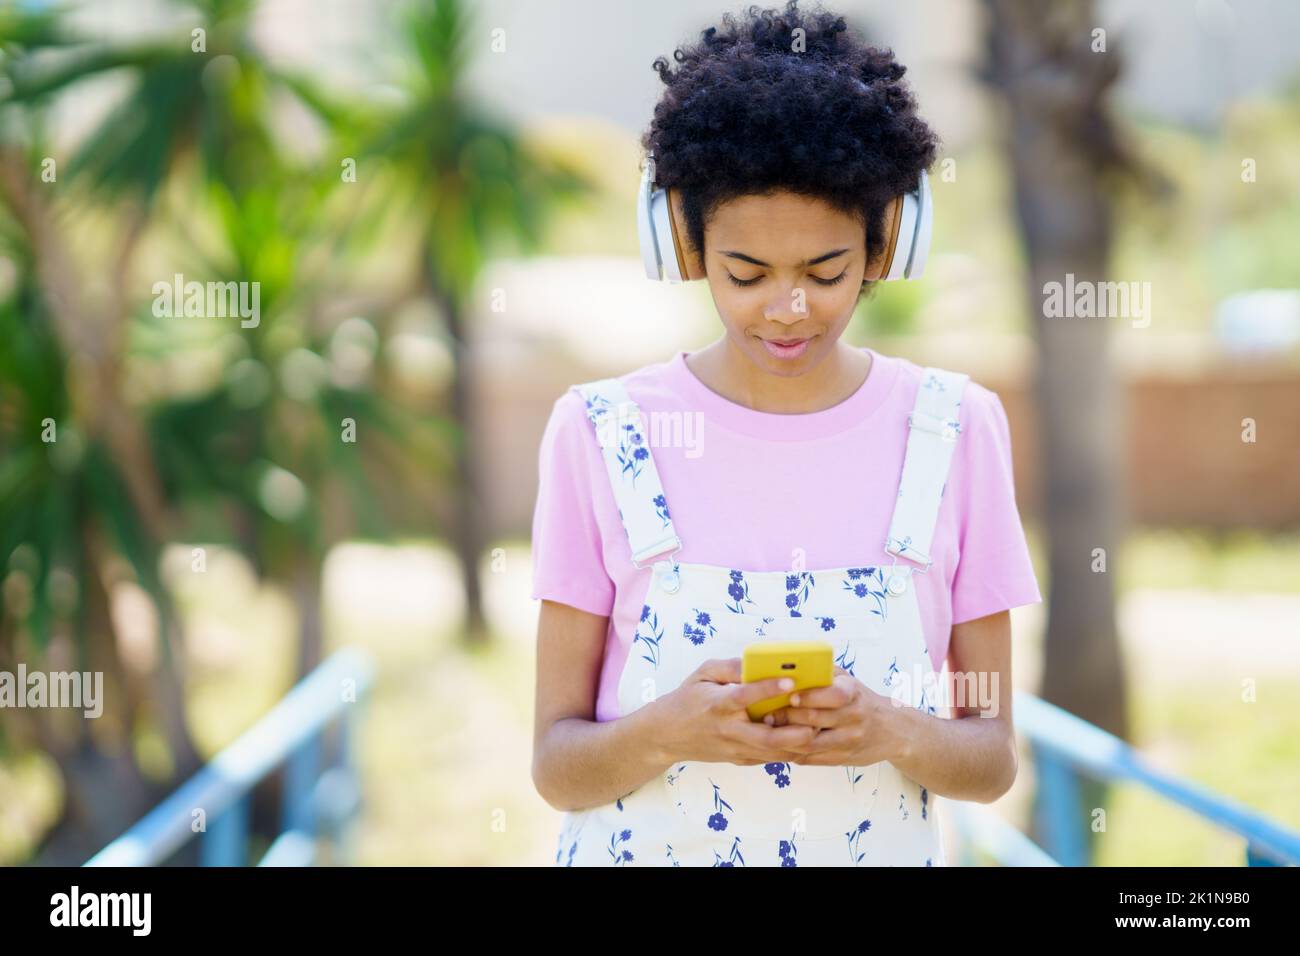 Black woman listening to music while browsing smartphone Stock Photo